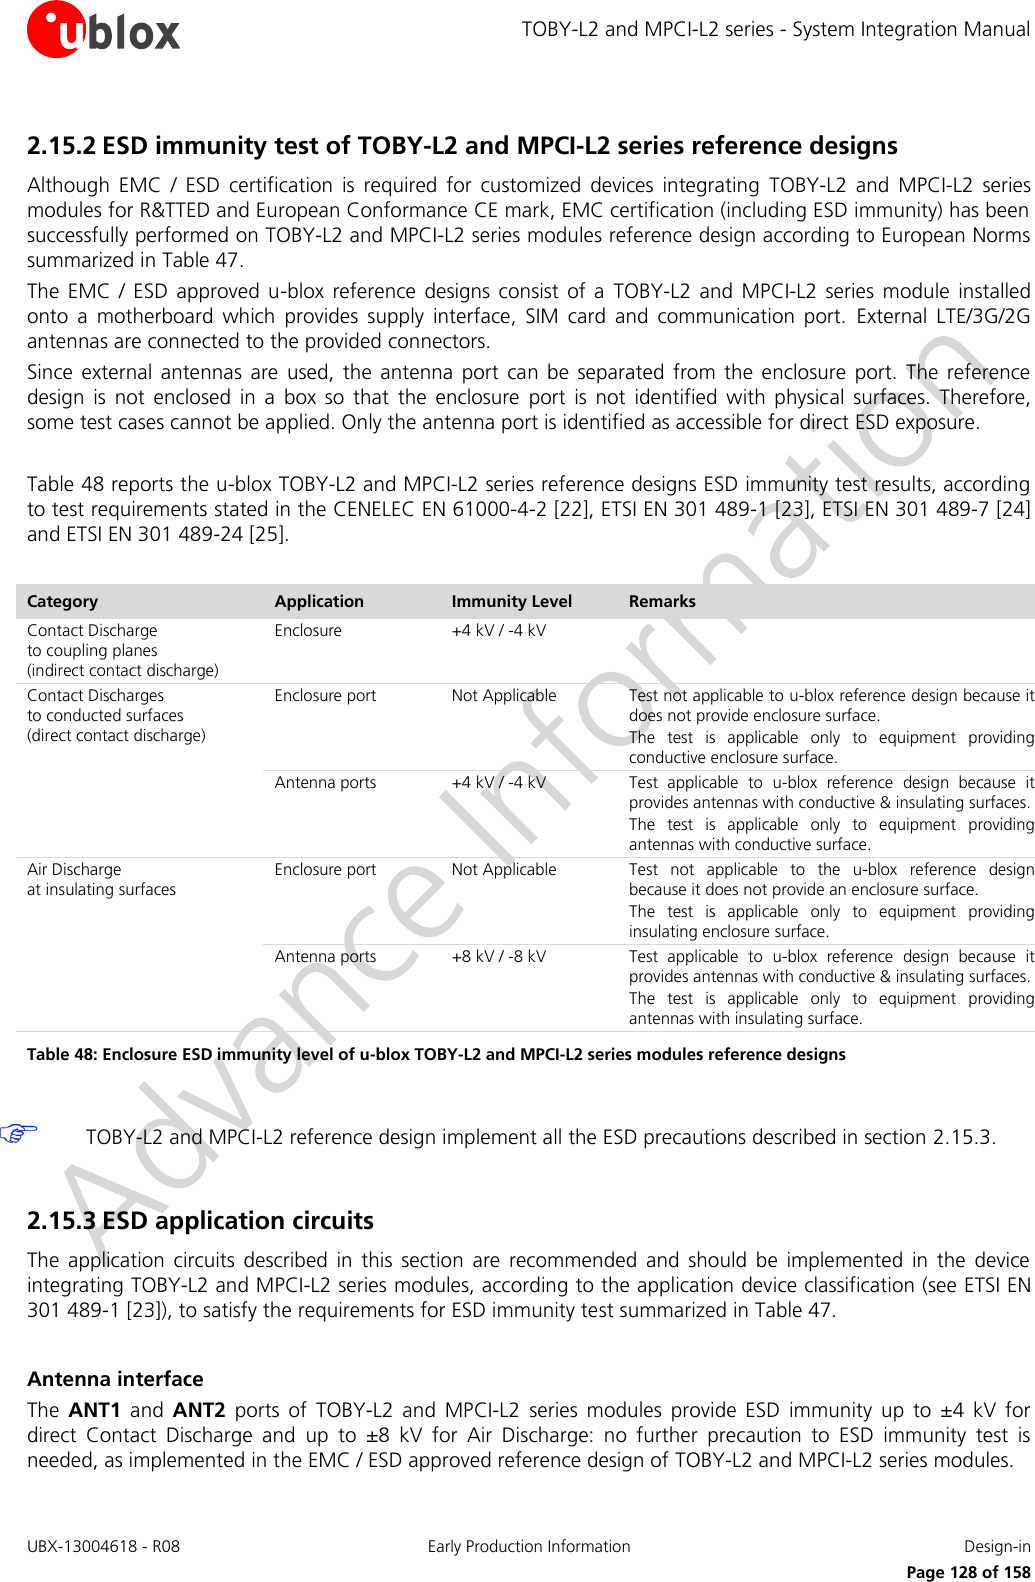 TOBY-L2 and MPCI-L2 series - System Integration Manual UBX-13004618 - R08  Early Production Information  Design-in     Page 128 of 158 2.15.2 ESD immunity test of TOBY-L2 and MPCI-L2 series reference designs Although  EMC  /  ESD  certification  is  required  for  customized  devices  integrating  TOBY-L2  and  MPCI-L2  series modules for R&amp;TTED and European Conformance CE mark, EMC certification (including ESD immunity) has been successfully performed on TOBY-L2 and MPCI-L2 series modules reference design according to European Norms summarized in Table 47. The  EMC  /  ESD  approved  u-blox  reference  designs consist  of  a  TOBY-L2  and  MPCI-L2  series  module  installed onto  a  motherboard  which  provides  supply  interface,  SIM  card  and  communication  port.  External  LTE/3G/2G antennas are connected to the provided connectors. Since  external  antennas  are  used,  the  antenna  port  can  be  separated  from  the  enclosure  port.  The  reference design  is  not  enclosed  in  a  box  so  that  the  enclosure  port  is  not  identified  with  physical  surfaces.  Therefore, some test cases cannot be applied. Only the antenna port is identified as accessible for direct ESD exposure.  Table 48 reports the u-blox TOBY-L2 and MPCI-L2 series reference designs ESD immunity test results, according to test requirements stated in the CENELEC EN 61000-4-2 [22], ETSI EN 301 489-1 [23], ETSI EN 301 489-7 [24] and ETSI EN 301 489-24 [25].  Category Application Immunity Level Remarks Contact Discharge  to coupling planes  (indirect contact discharge) Enclosure +4 kV / -4 kV  Contact Discharges  to conducted surfaces  (direct contact discharge) Enclosure port Not Applicable Test not applicable to u-blox reference design because it does not provide enclosure surface. The  test  is  applicable  only  to  equipment  providing conductive enclosure surface. Antenna ports +4 kV / -4 kV Test  applicable  to  u-blox  reference  design  because  it provides antennas with conductive &amp; insulating surfaces. The  test  is  applicable  only  to  equipment  providing antennas with conductive surface. Air Discharge  at insulating surfaces Enclosure port Not Applicable Test  not  applicable  to  the  u-blox  reference  design because it does not provide an enclosure surface. The  test  is  applicable  only  to  equipment  providing insulating enclosure surface. Antenna ports +8 kV / -8 kV Test  applicable  to  u-blox  reference  design  because  it provides antennas with conductive &amp; insulating surfaces. The  test  is  applicable  only  to  equipment  providing antennas with insulating surface. Table 48: Enclosure ESD immunity level of u-blox TOBY-L2 and MPCI-L2 series modules reference designs   TOBY-L2 and MPCI-L2 reference design implement all the ESD precautions described in section 2.15.3.  2.15.3 ESD application circuits The  application  circuits  described  in  this  section  are  recommended  and  should  be  implemented  in  the  device integrating TOBY-L2 and MPCI-L2 series modules, according to the application device classification (see ETSI EN 301 489-1 [23]), to satisfy the requirements for ESD immunity test summarized in Table 47.  Antenna interface  The  ANT1  and  ANT2  ports  of  TOBY-L2  and  MPCI-L2  series  modules  provide  ESD  immunity  up  to  ±4  kV  for direct  Contact  Discharge  and  up  to  ±8  kV  for  Air  Discharge:  no  further  precaution  to  ESD  immunity  test  is needed, as implemented in the EMC / ESD approved reference design of TOBY-L2 and MPCI-L2 series modules. 